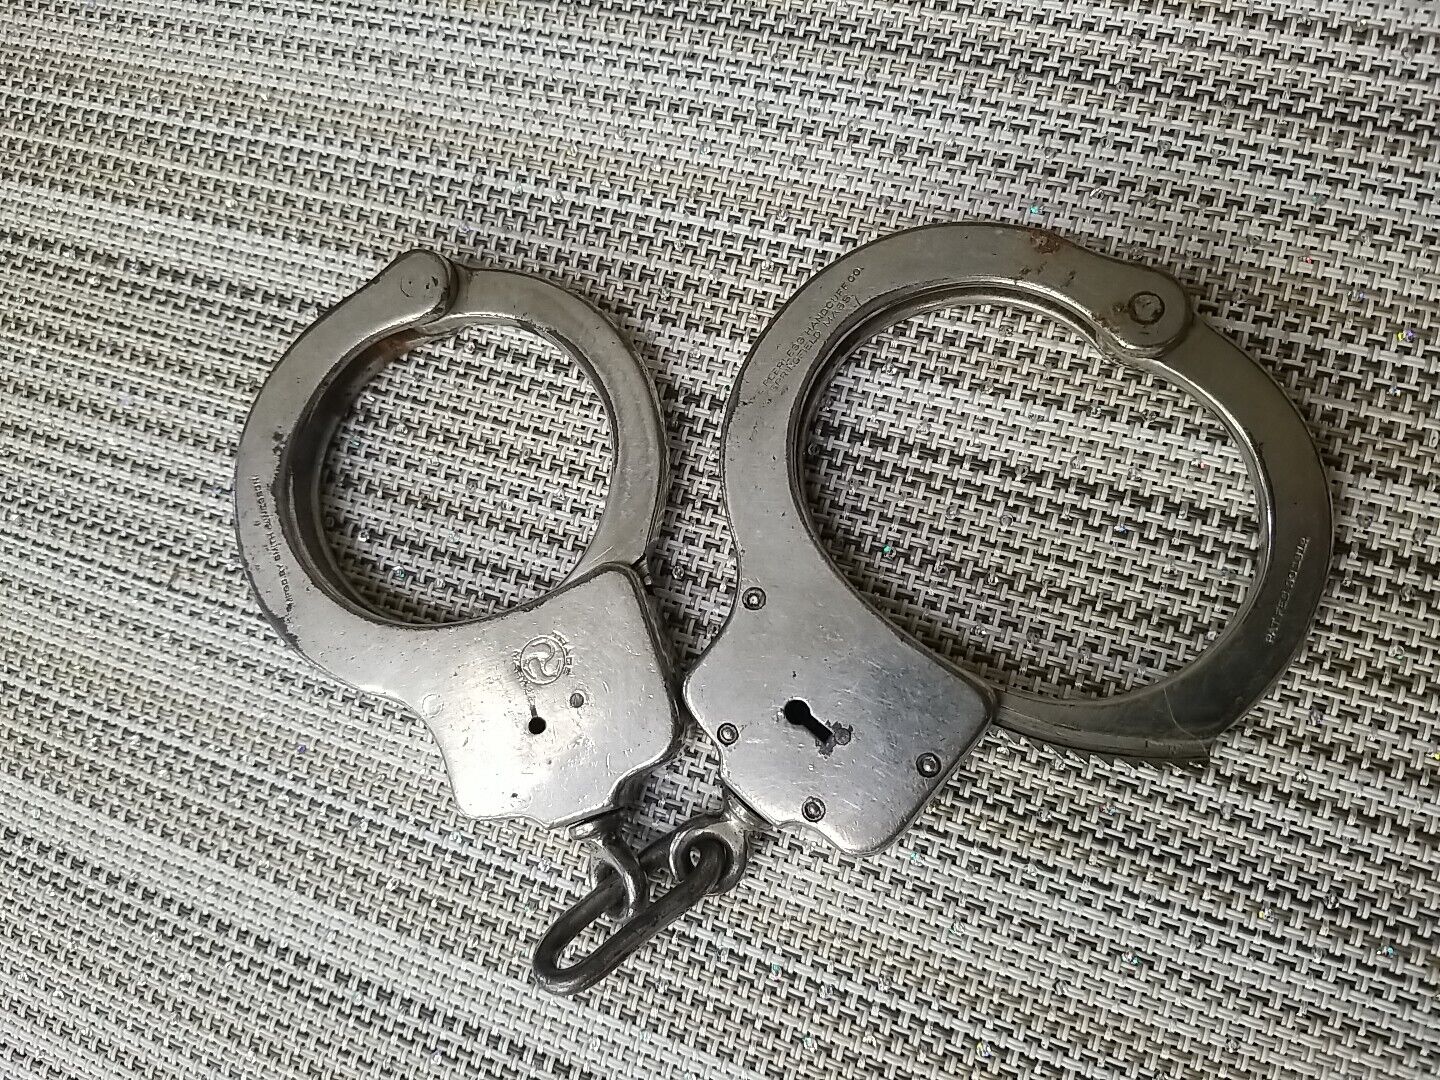 1912 Vintage PEERLESS HANDCUFFS MFG BY SMITH & WESSON PATENTED 2/20/1912-NO KEY